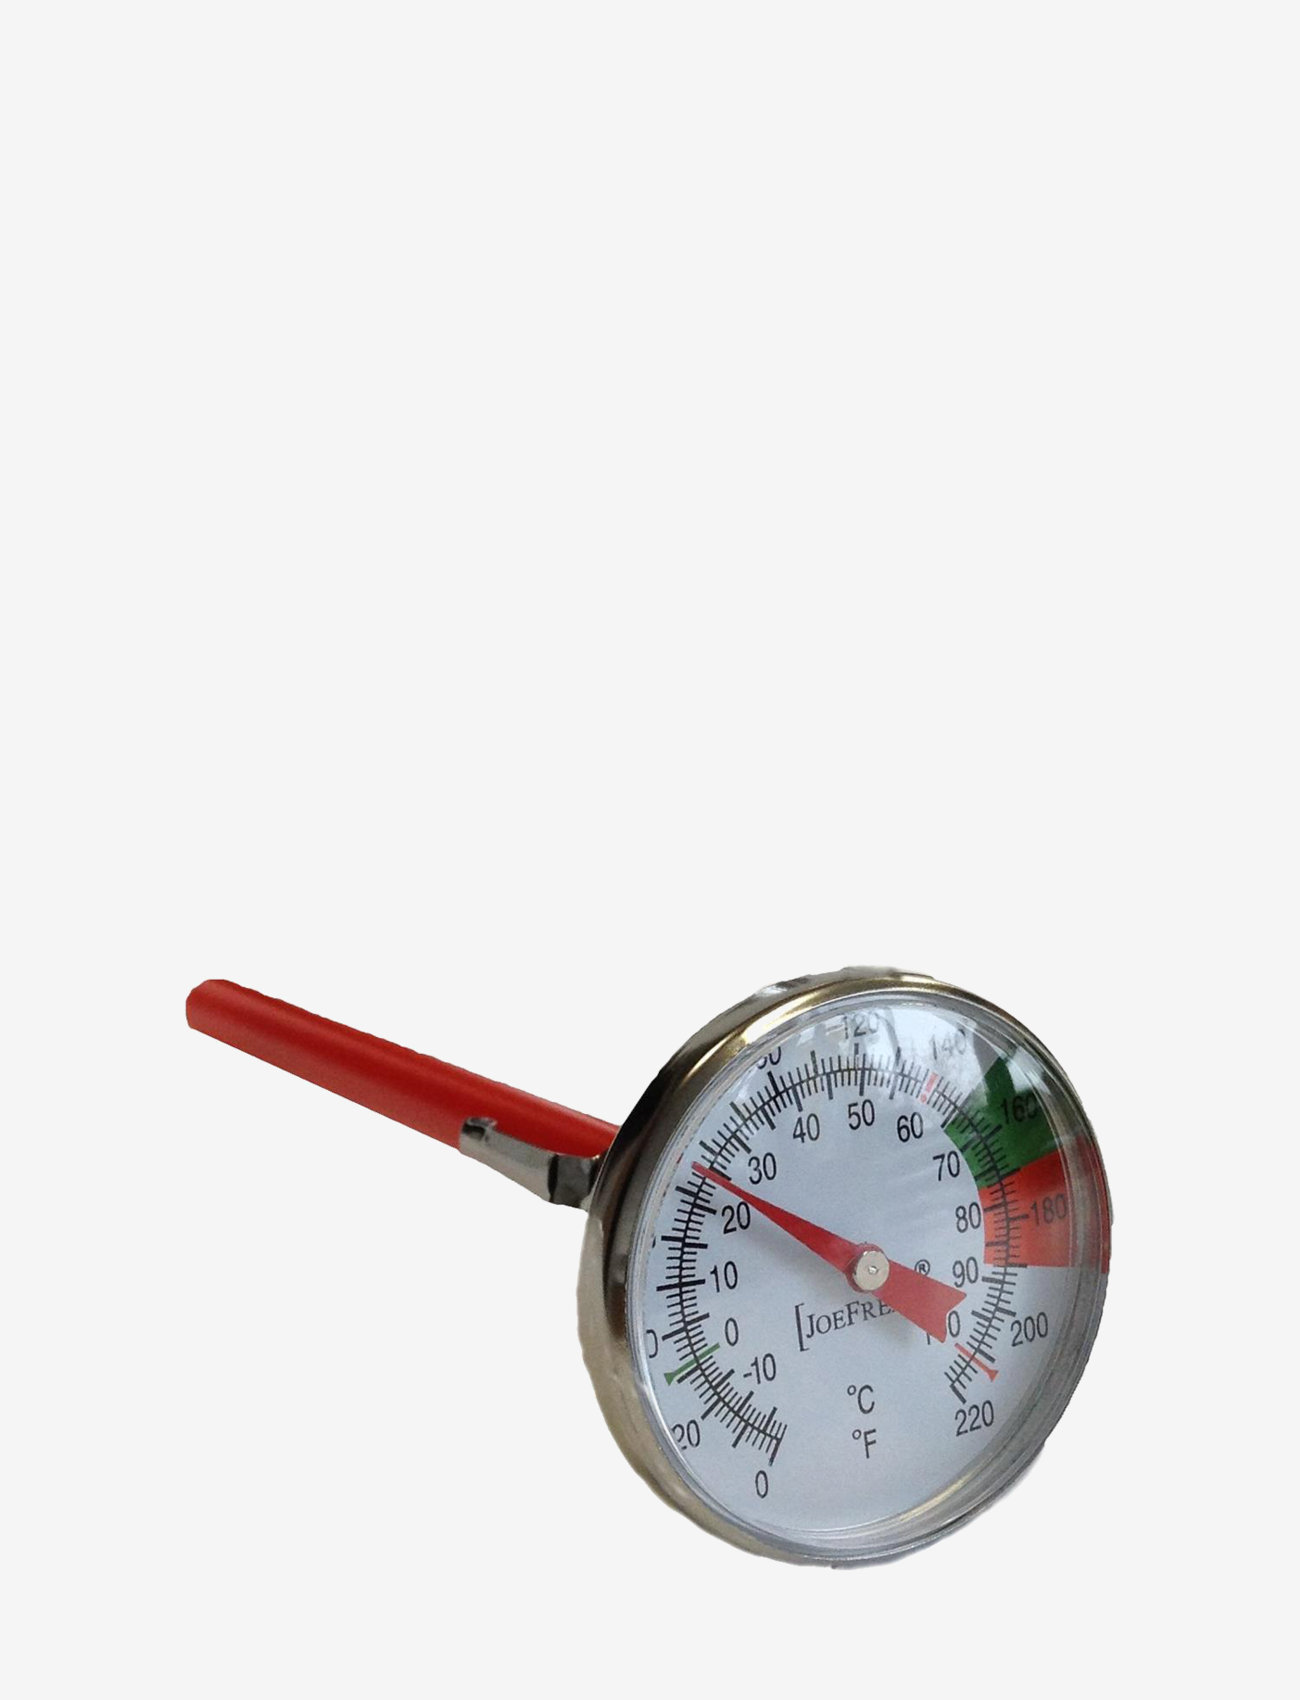 Joe Frex - Milk thermometer - lowest prices - silver - 0